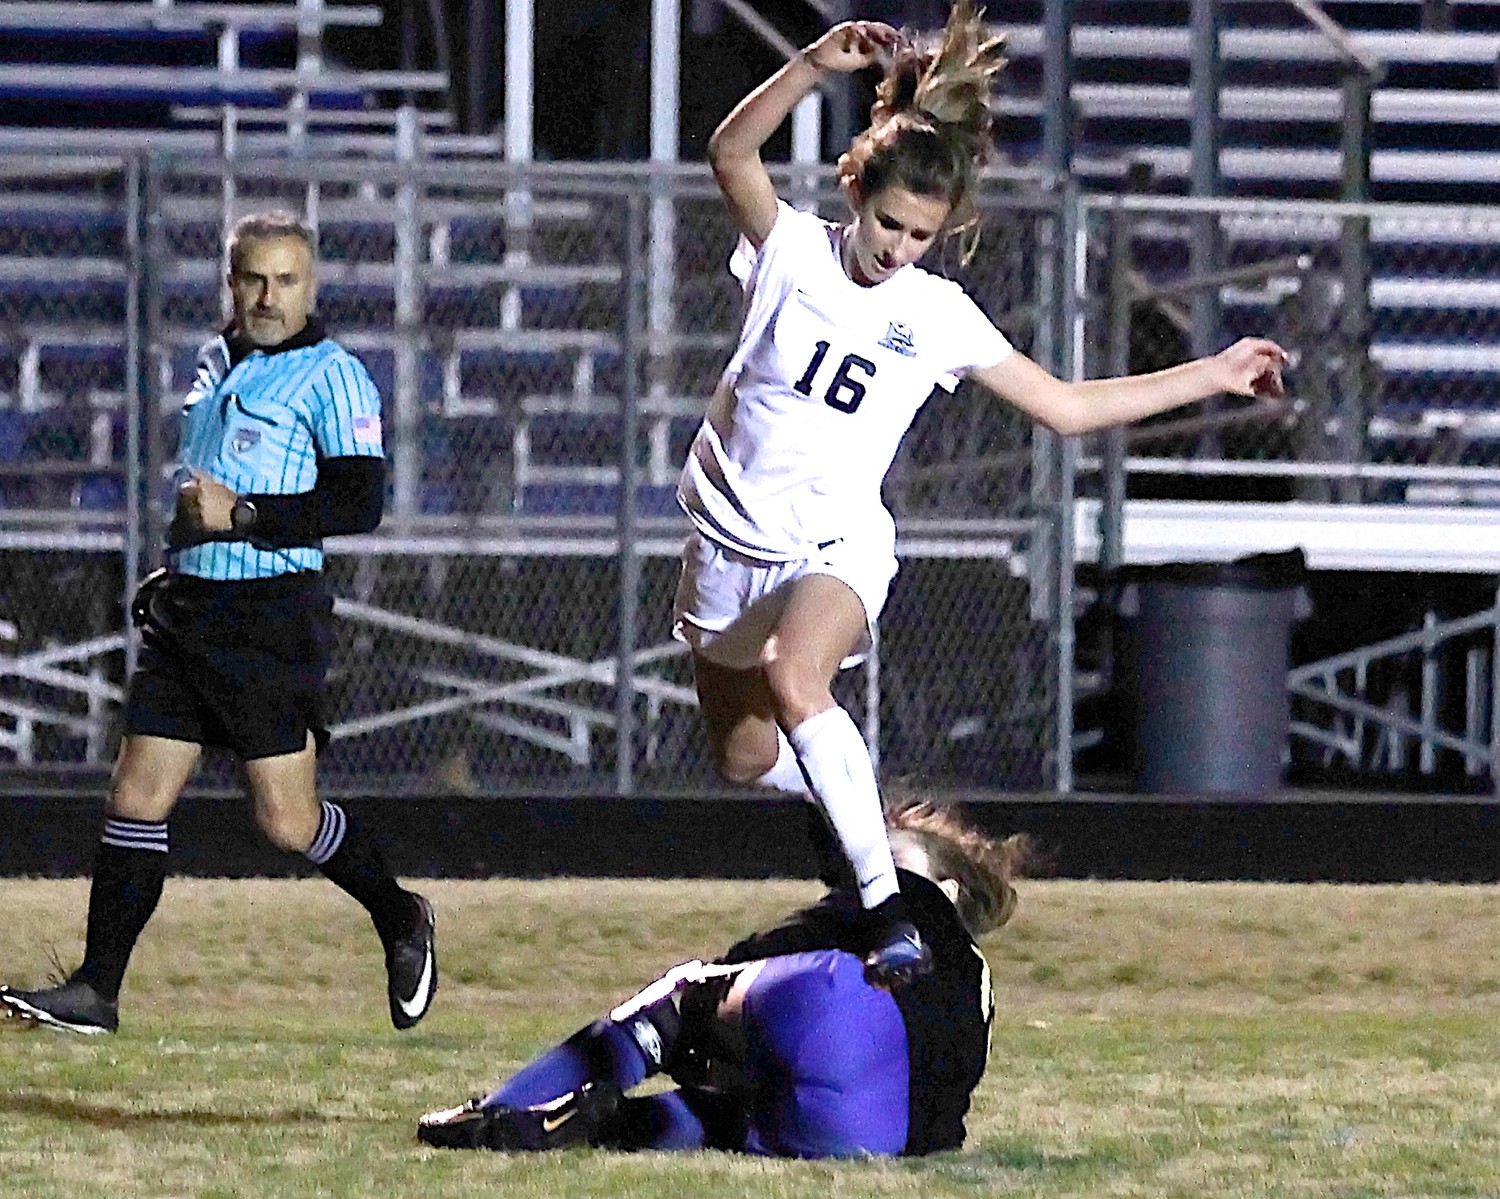 Julia Deal (16) of Ponte Vedra leaps over the Falcons’ goalkeeper.